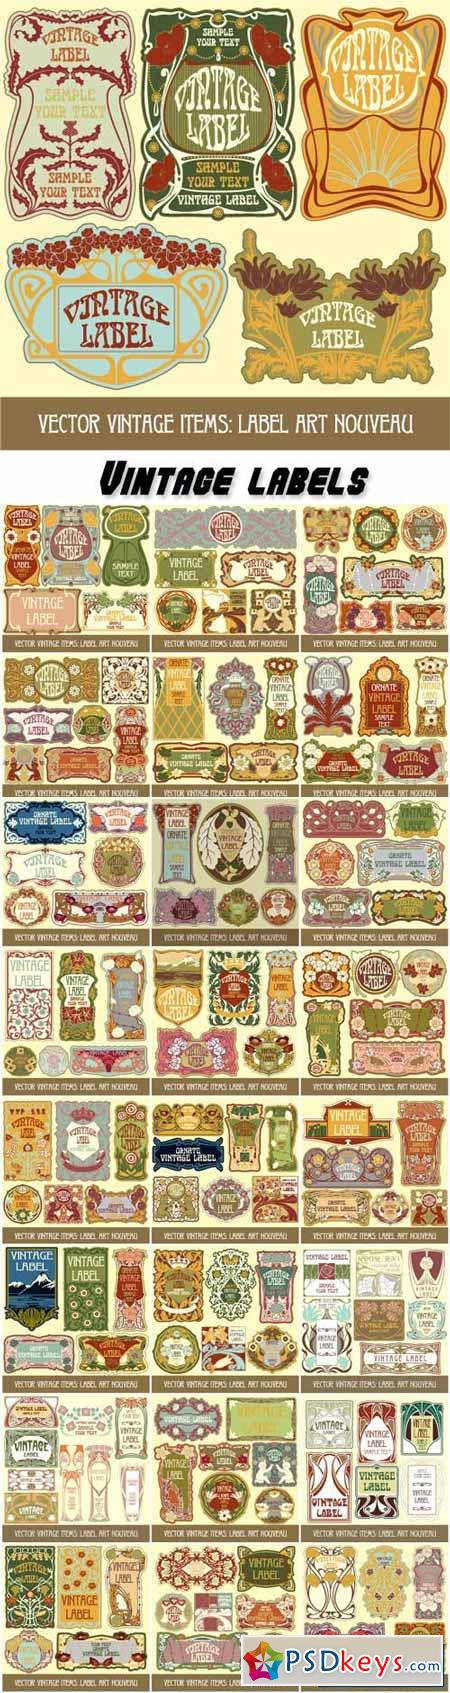 Vector collection of vintage labels